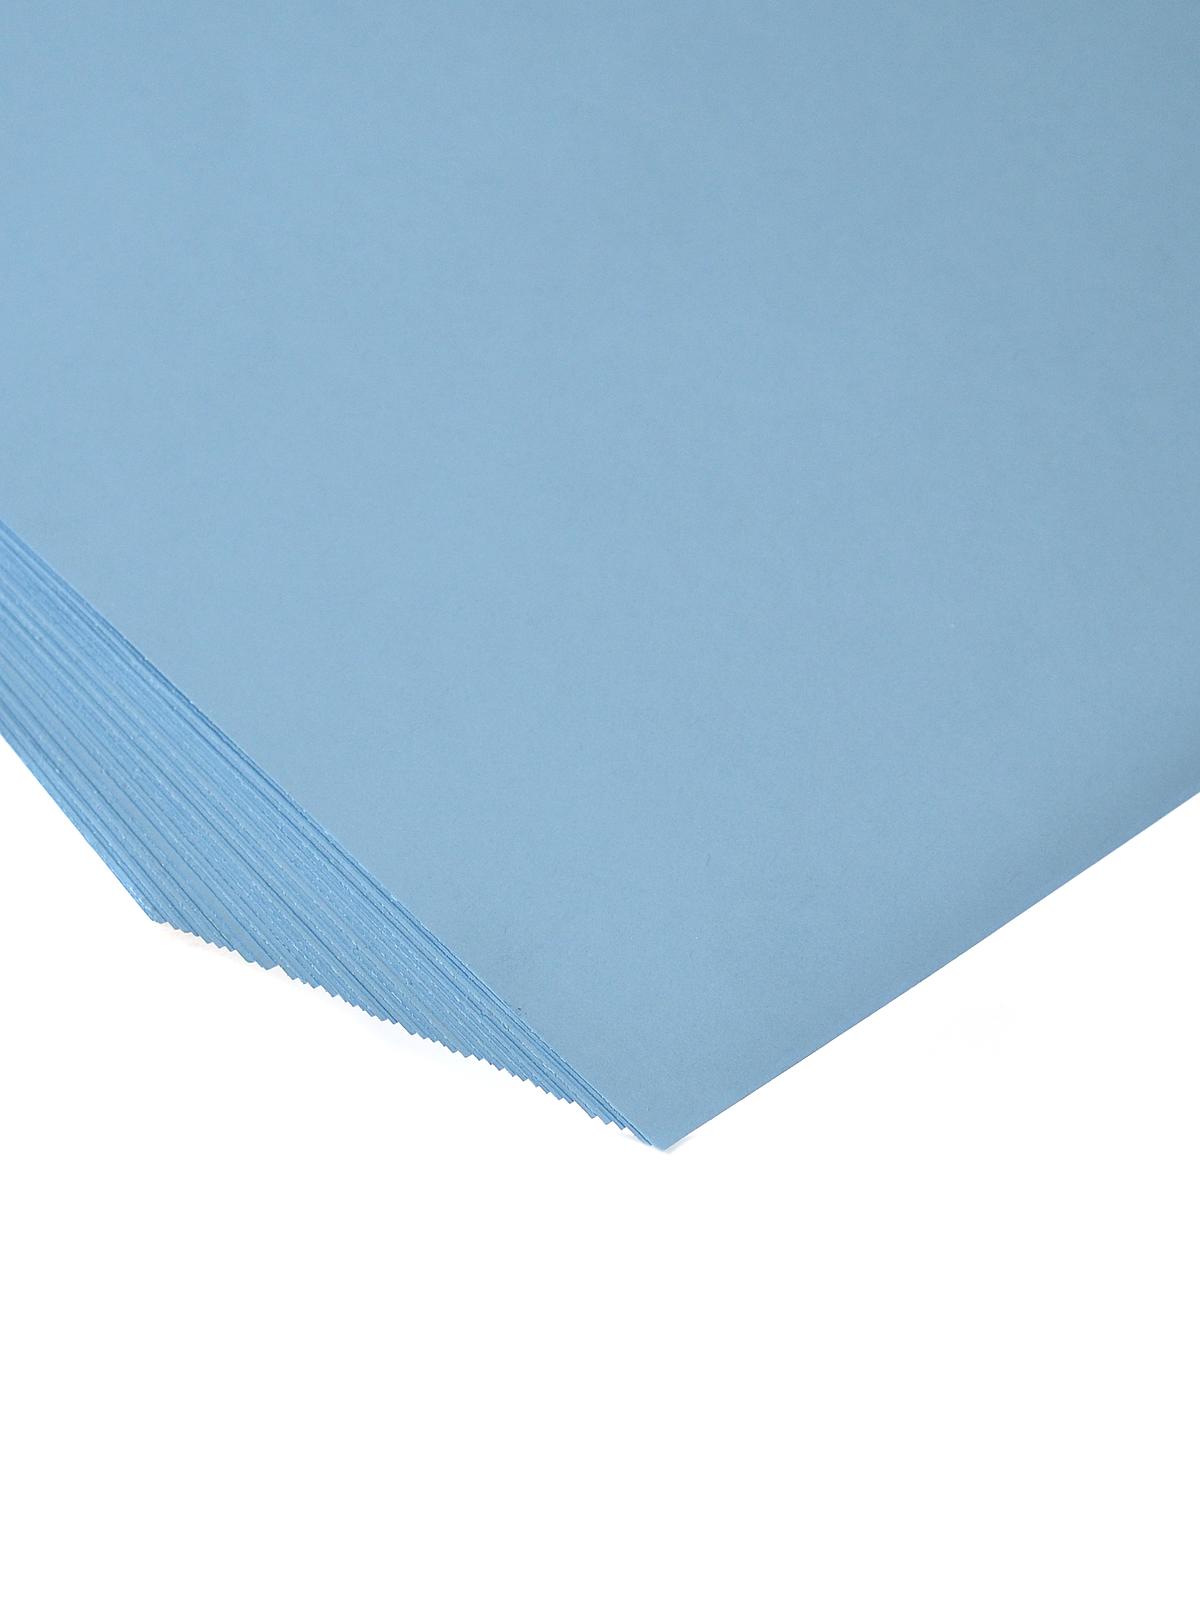 Sulphite Construction Paper Sky Blue 12 In. X 18 In. 50 Sheets